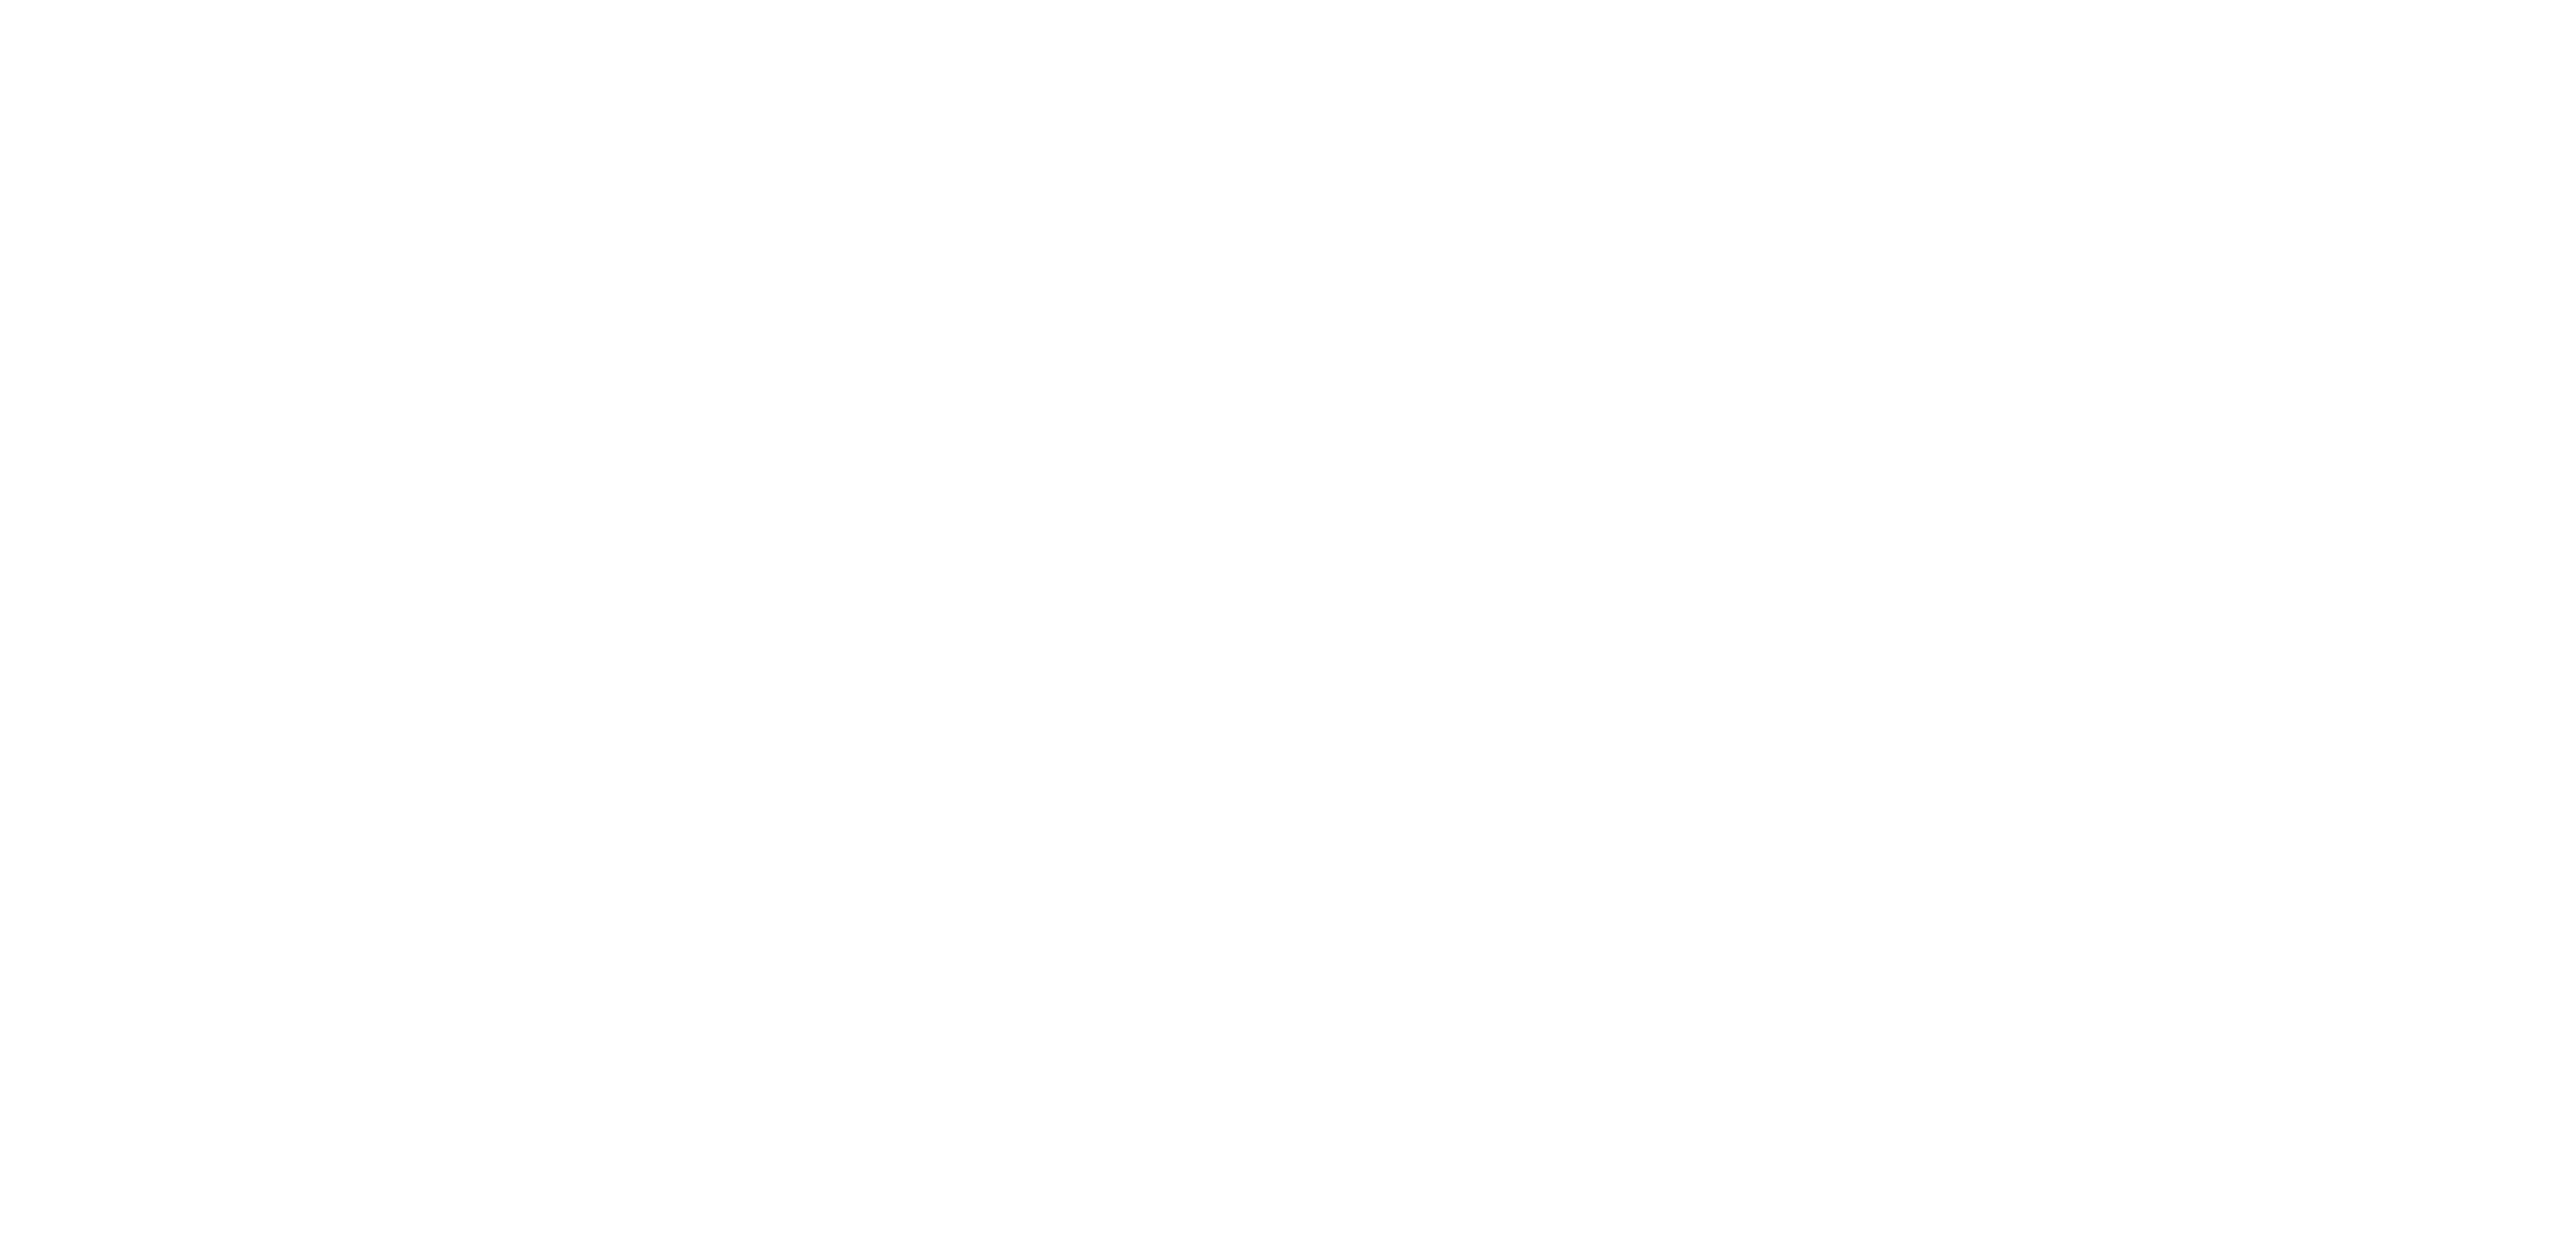 THS Student Union at KTH